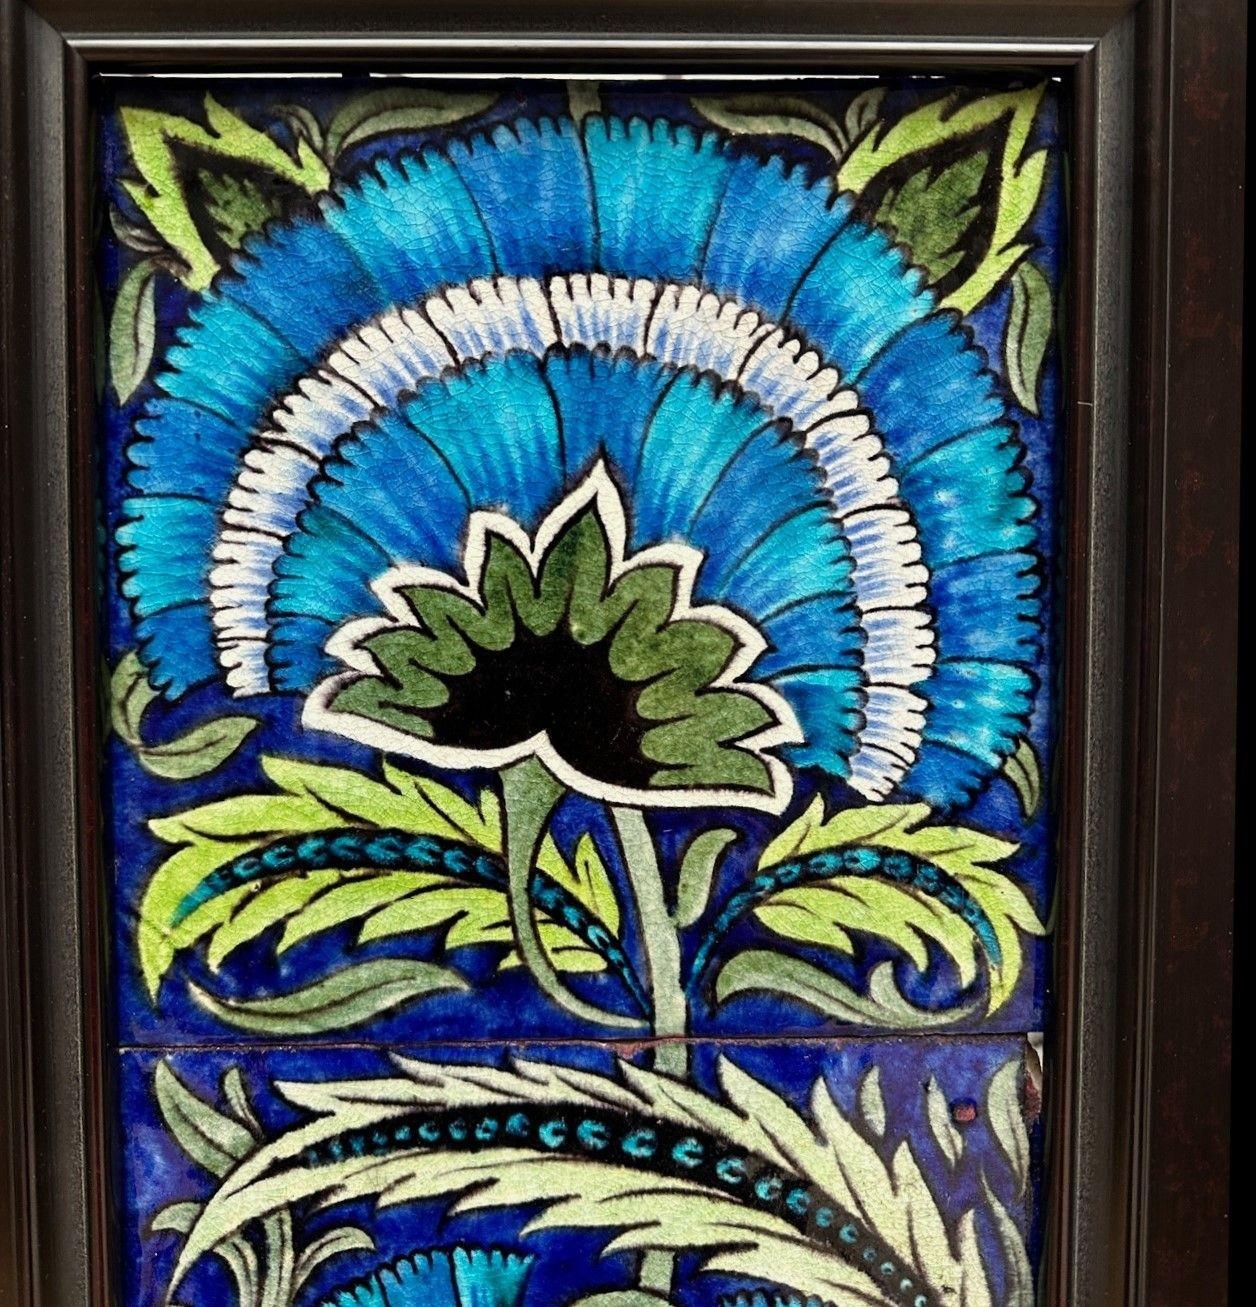 5470
Striking and Vibrant William De Morgan Tile Panel decorated in the “Fan” design in an Ebonised Frame
The tiles 8” / 20cm
Tile 2 with chip to the top right corner and graze to high points on the tile
Tile 3 with glaze frit to top left